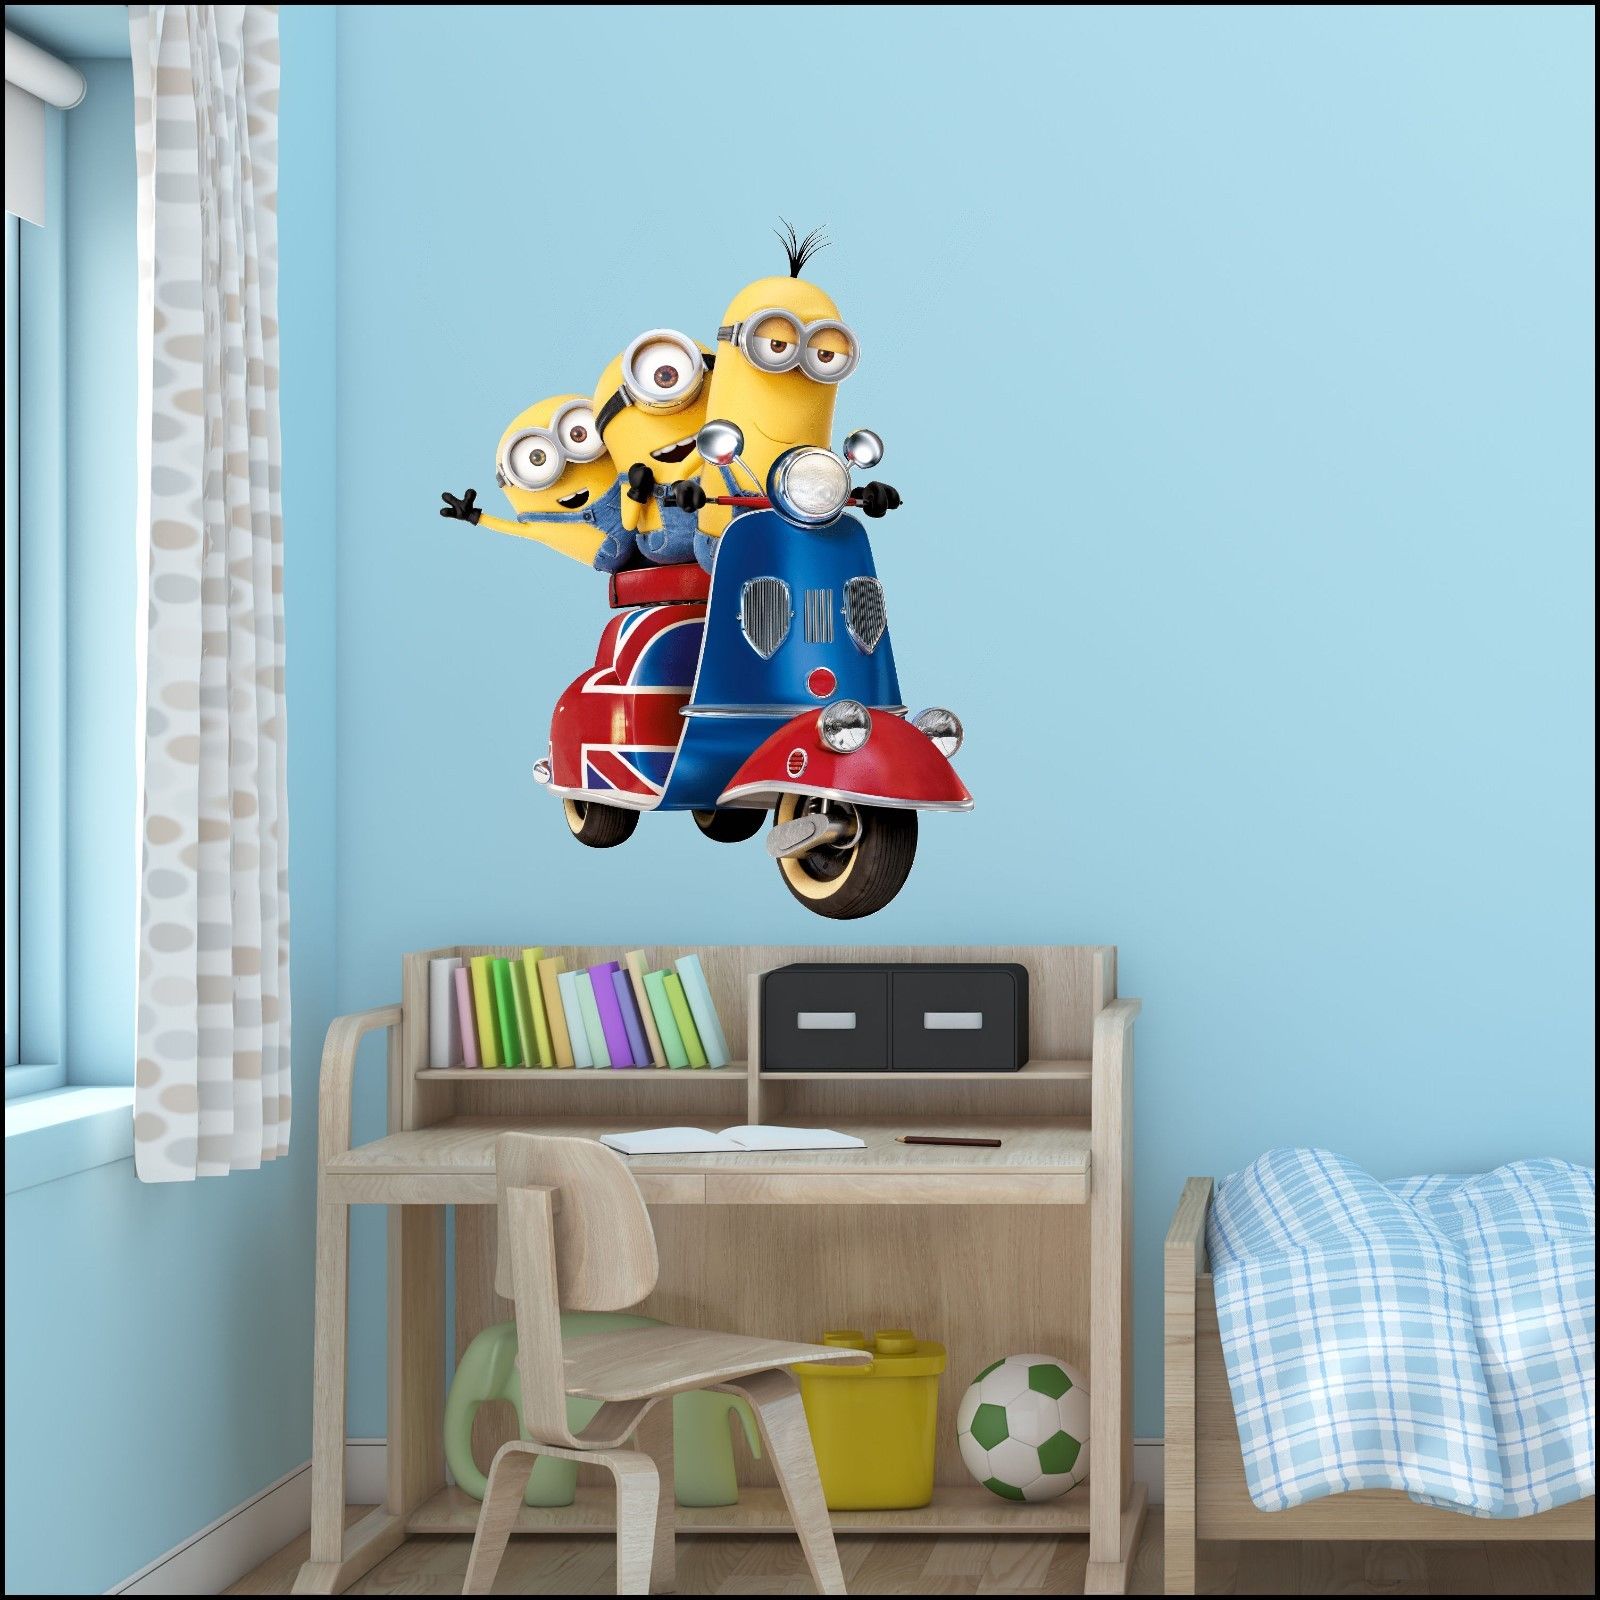 3 Minions Despicable ME 2 Removable wall stickers Decal Room Decor Movie UK 